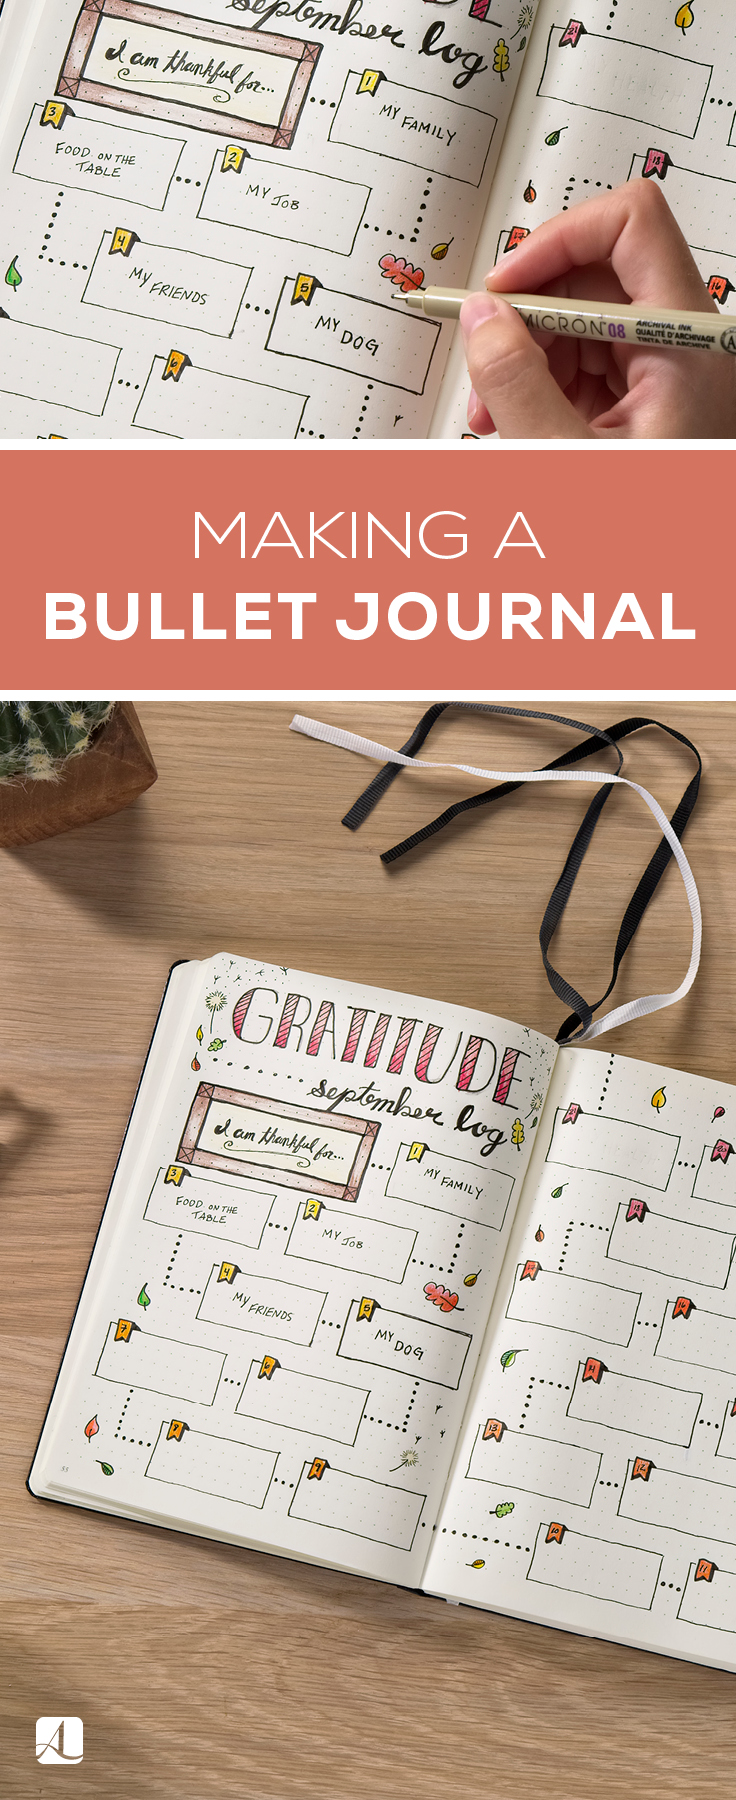 Just Journal It: Tips for Making Your Own Bullet Journal - American ...